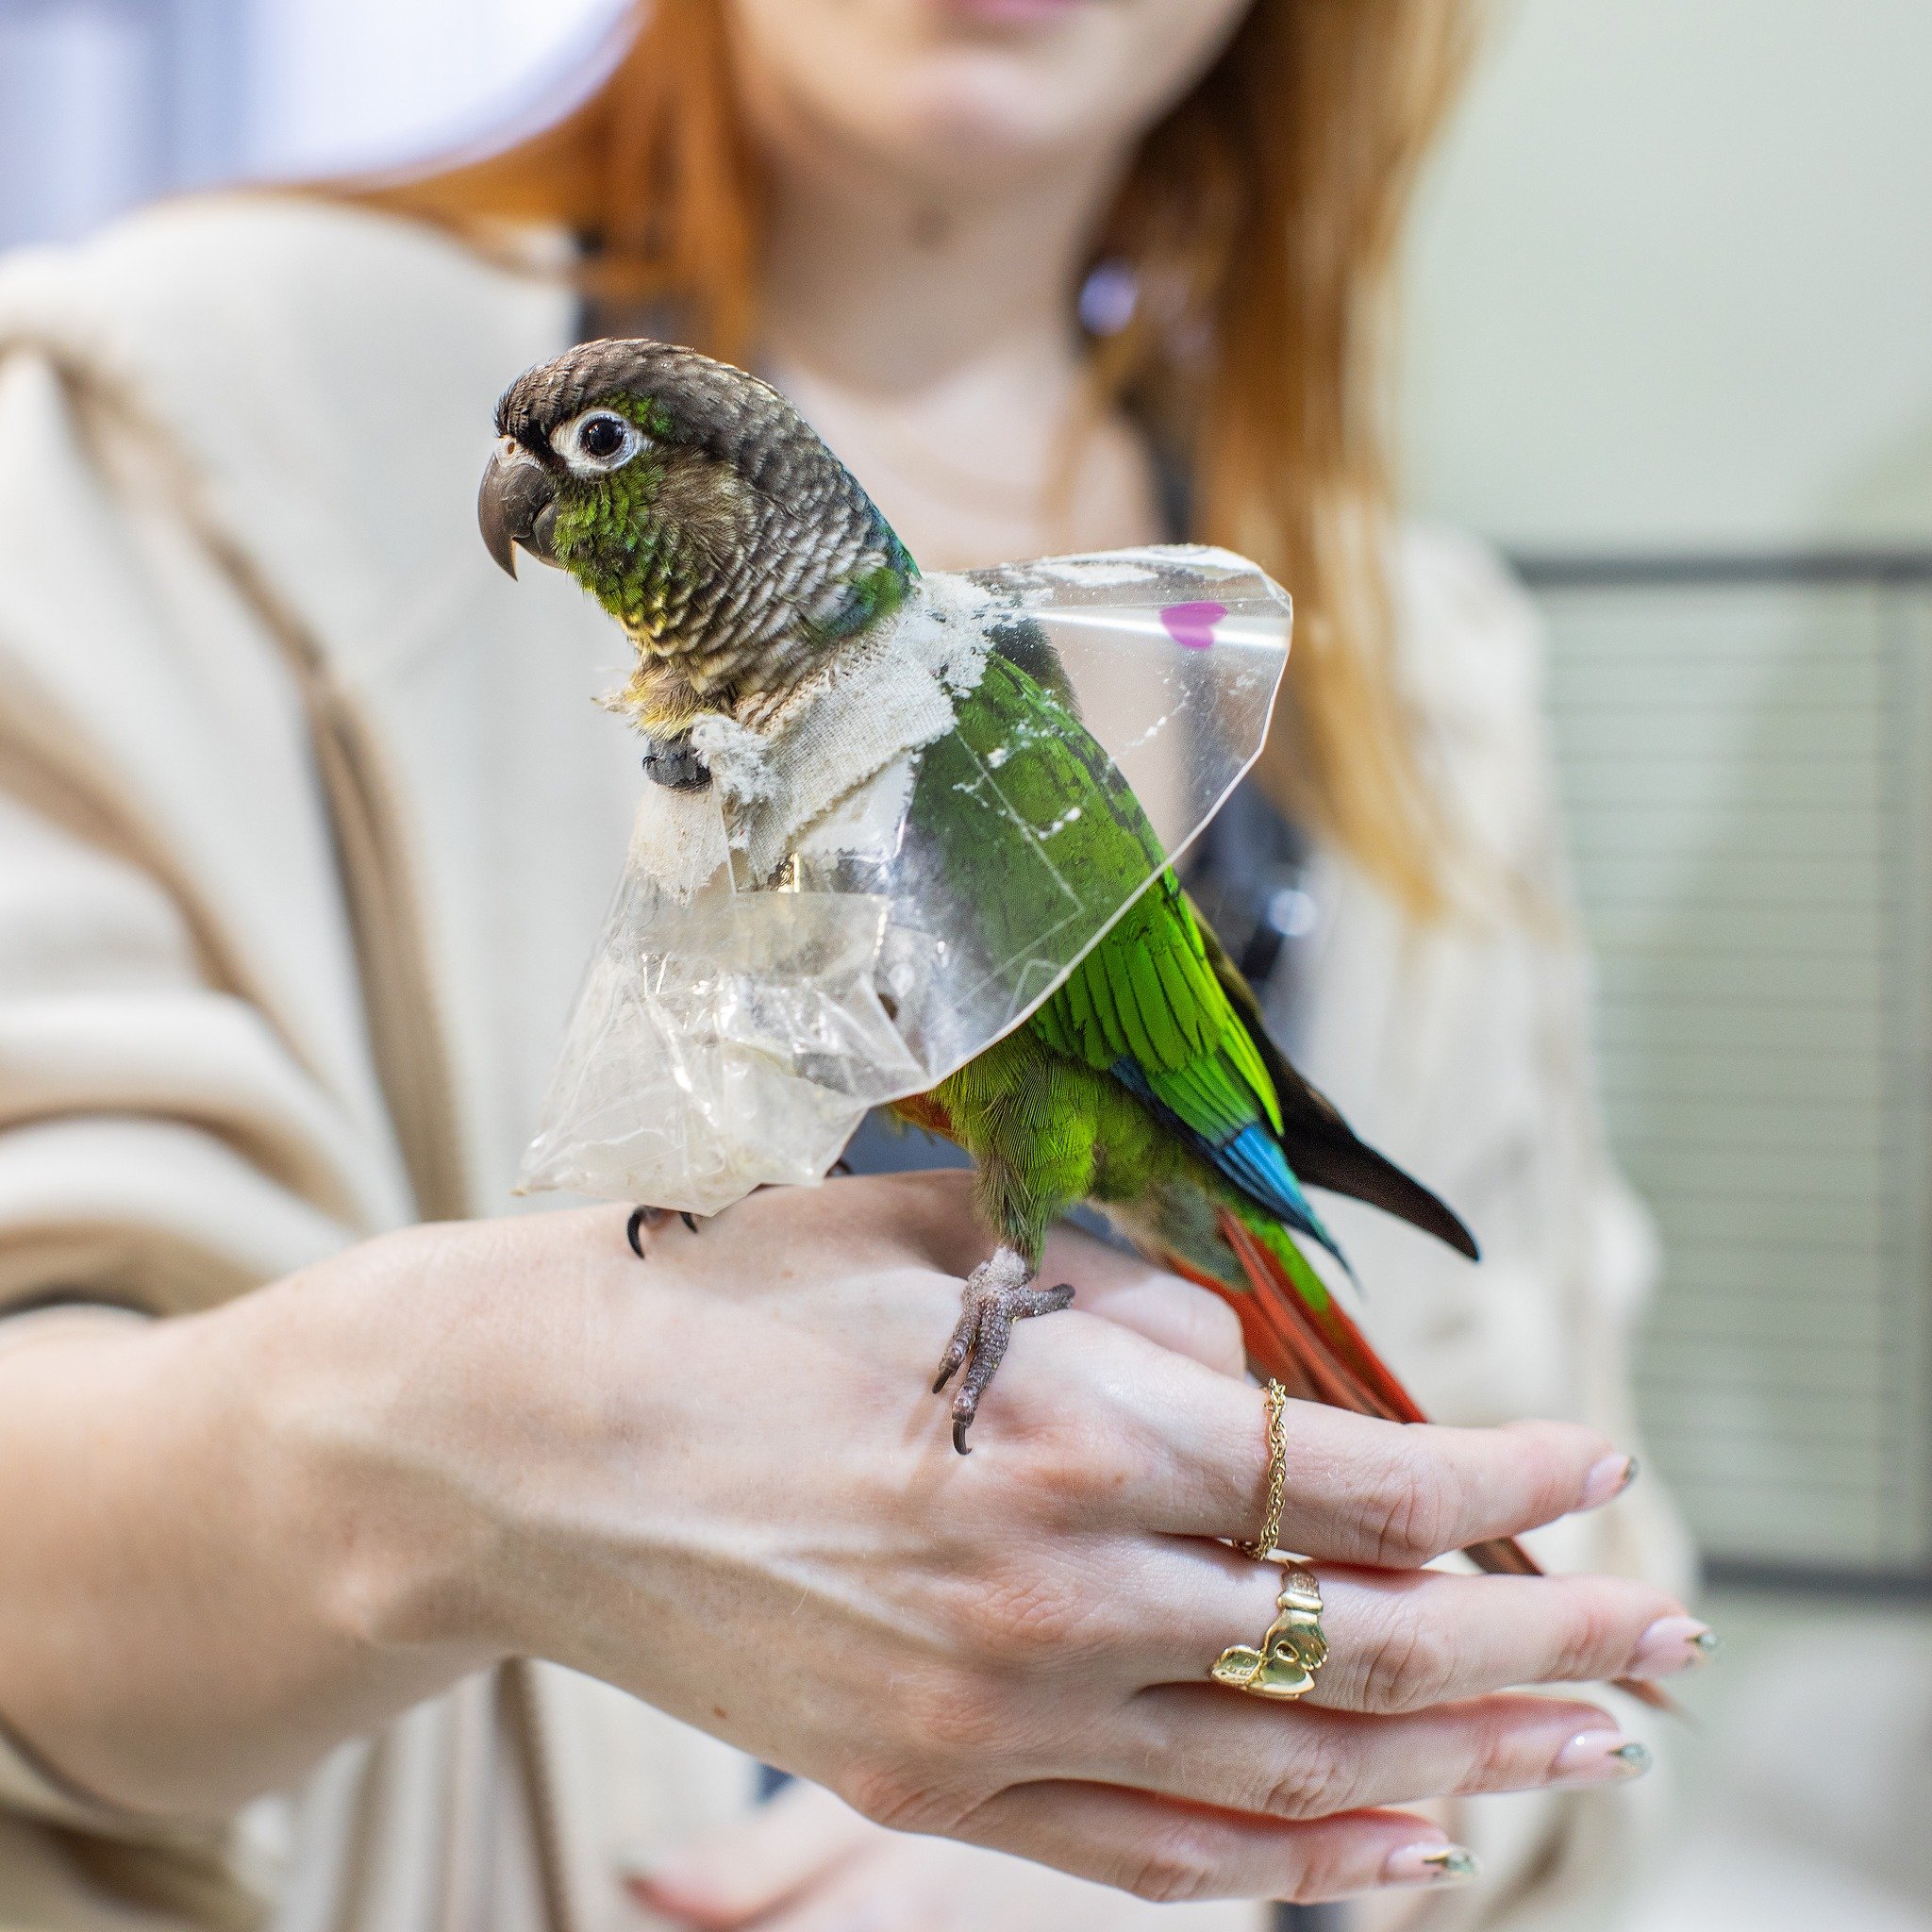 It is Bird Day (and as the AVIAN and Exotic Animal Clinic, we couldn't not celebrate 🥳)!

Please join us in celebrating by sharing pictures of your feathered friends 🦜🦎 #exoticvetclinic #exoticvetmed